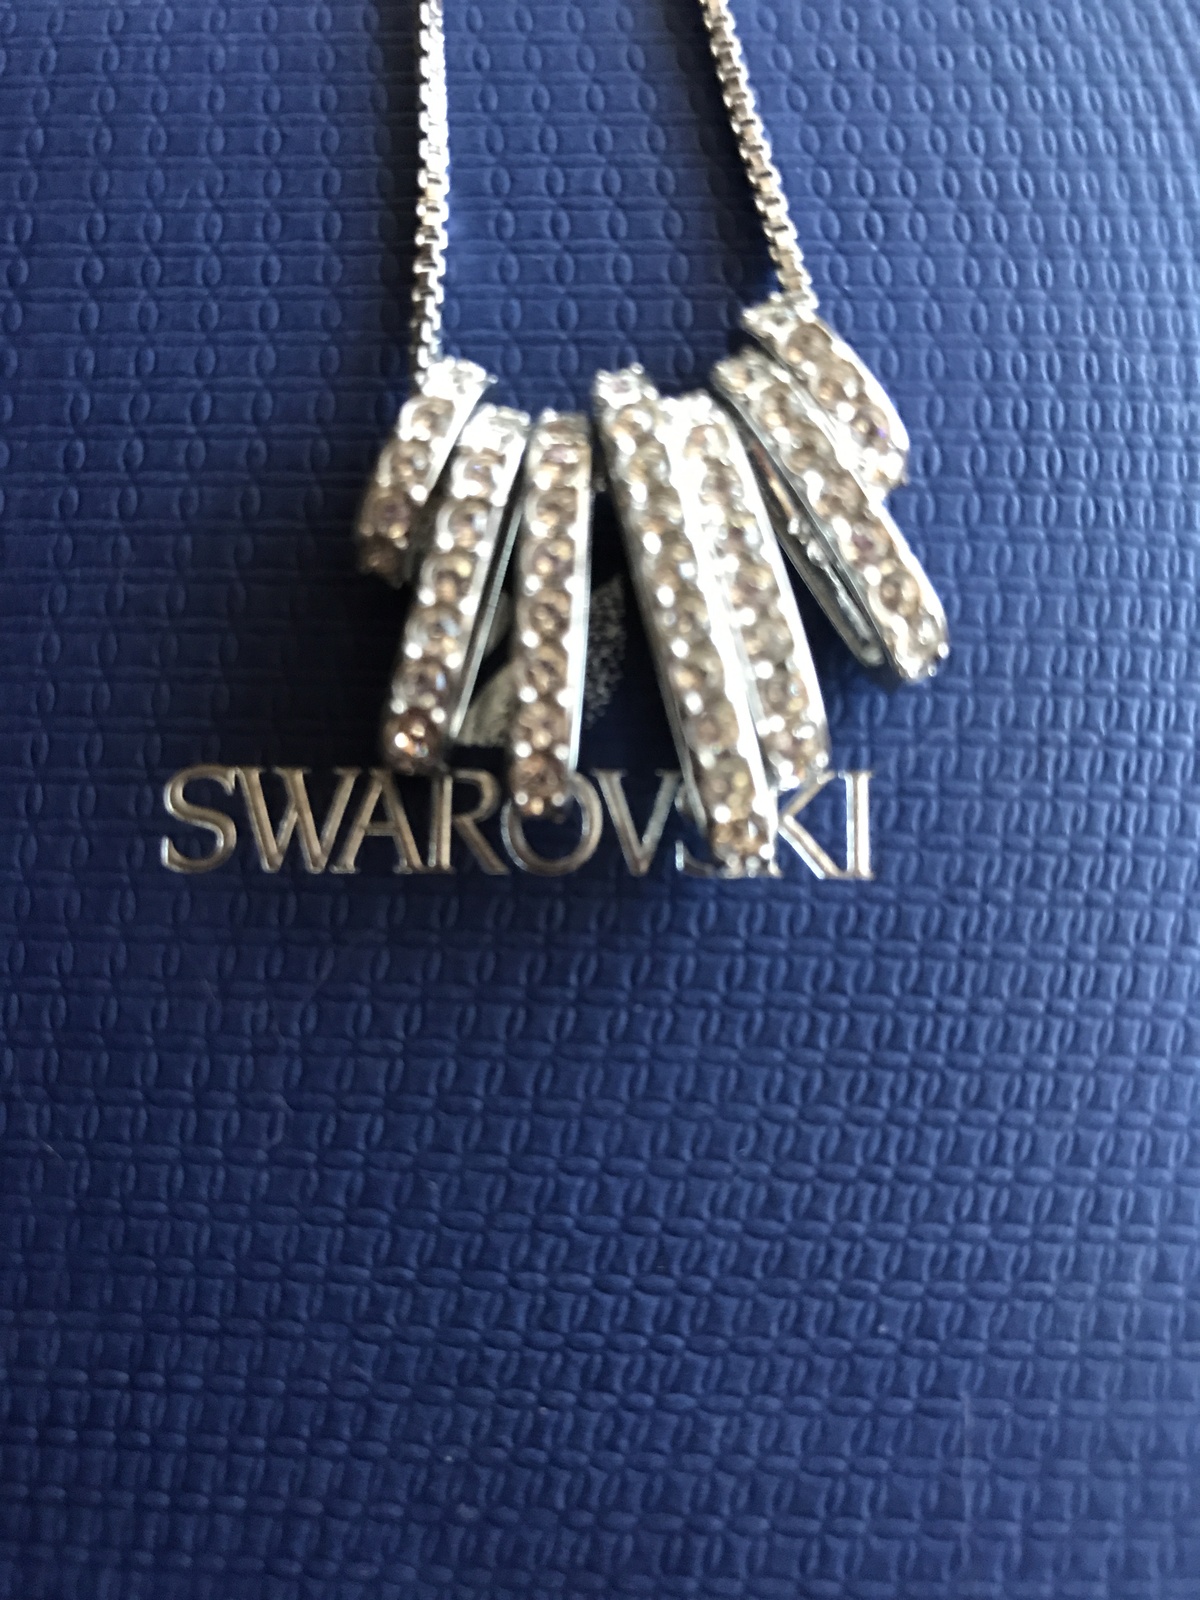 Primary image for Swarovski Crystal Sterling Silver Necklace Jewelry